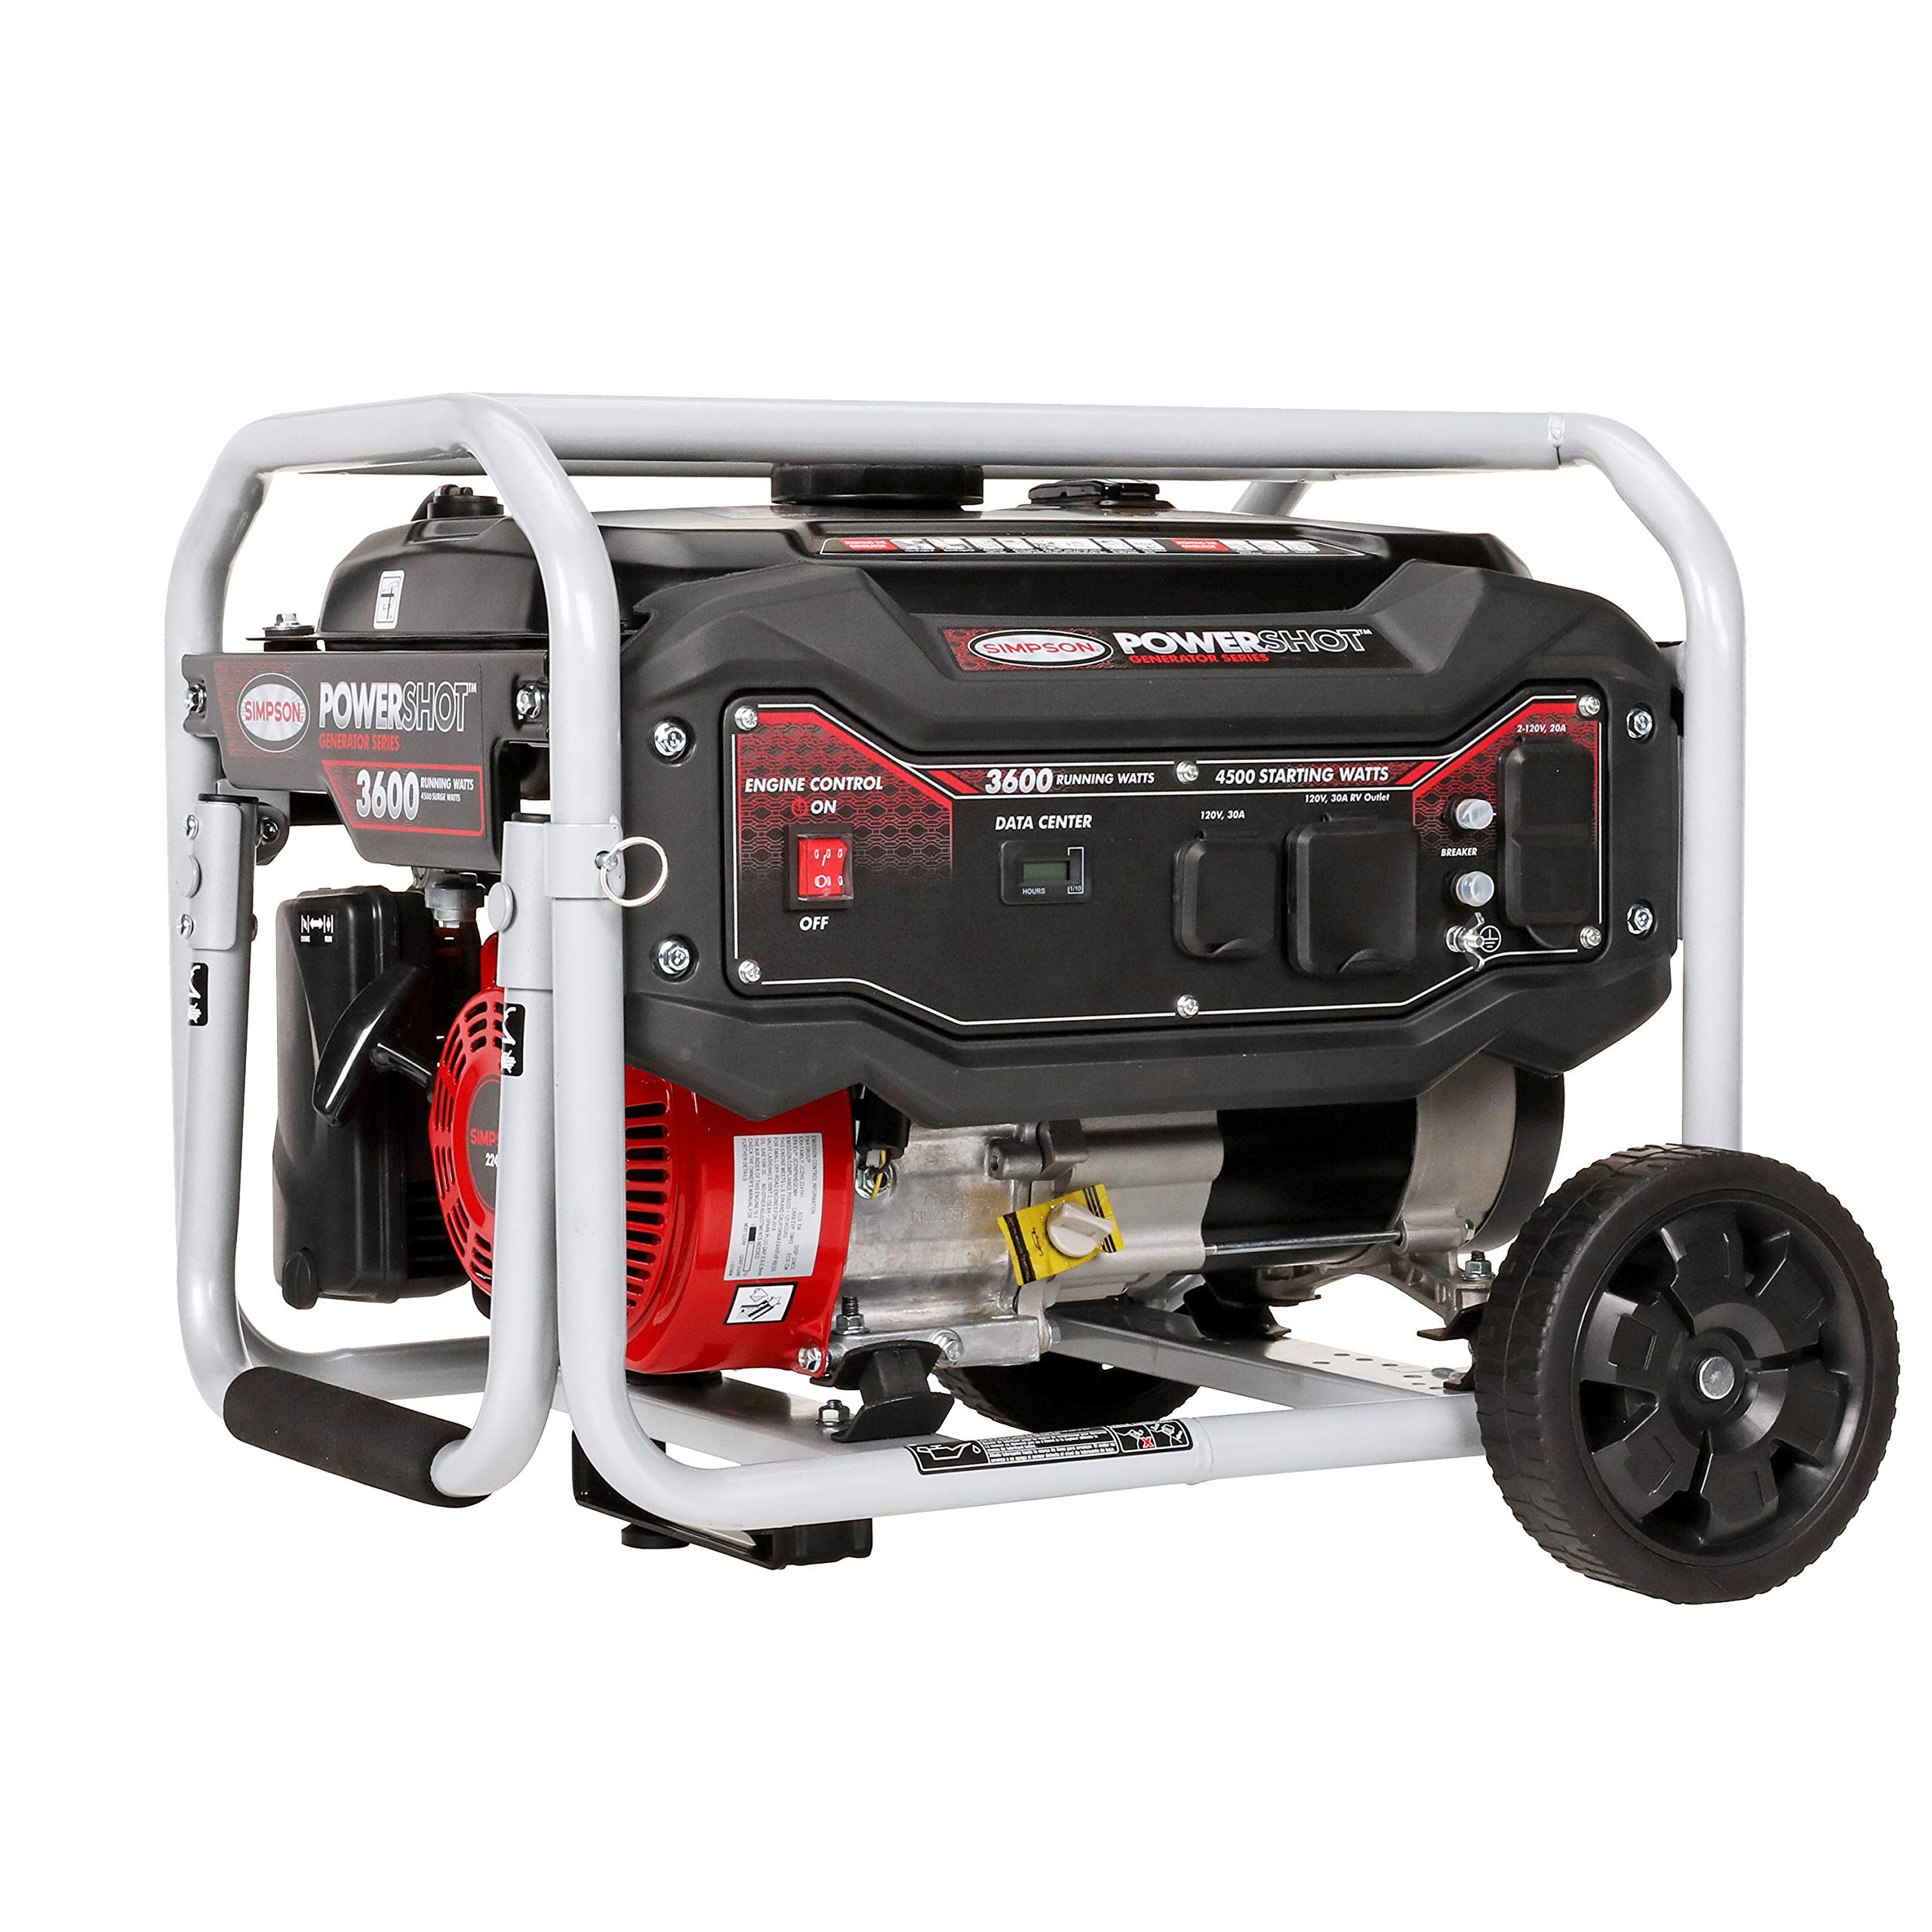 SIMPSON PowerShot Portable 3,600 Watt Generator with Roll Cage Frame Protection and Low Oil Shutdown Feature for Outdoor Generators